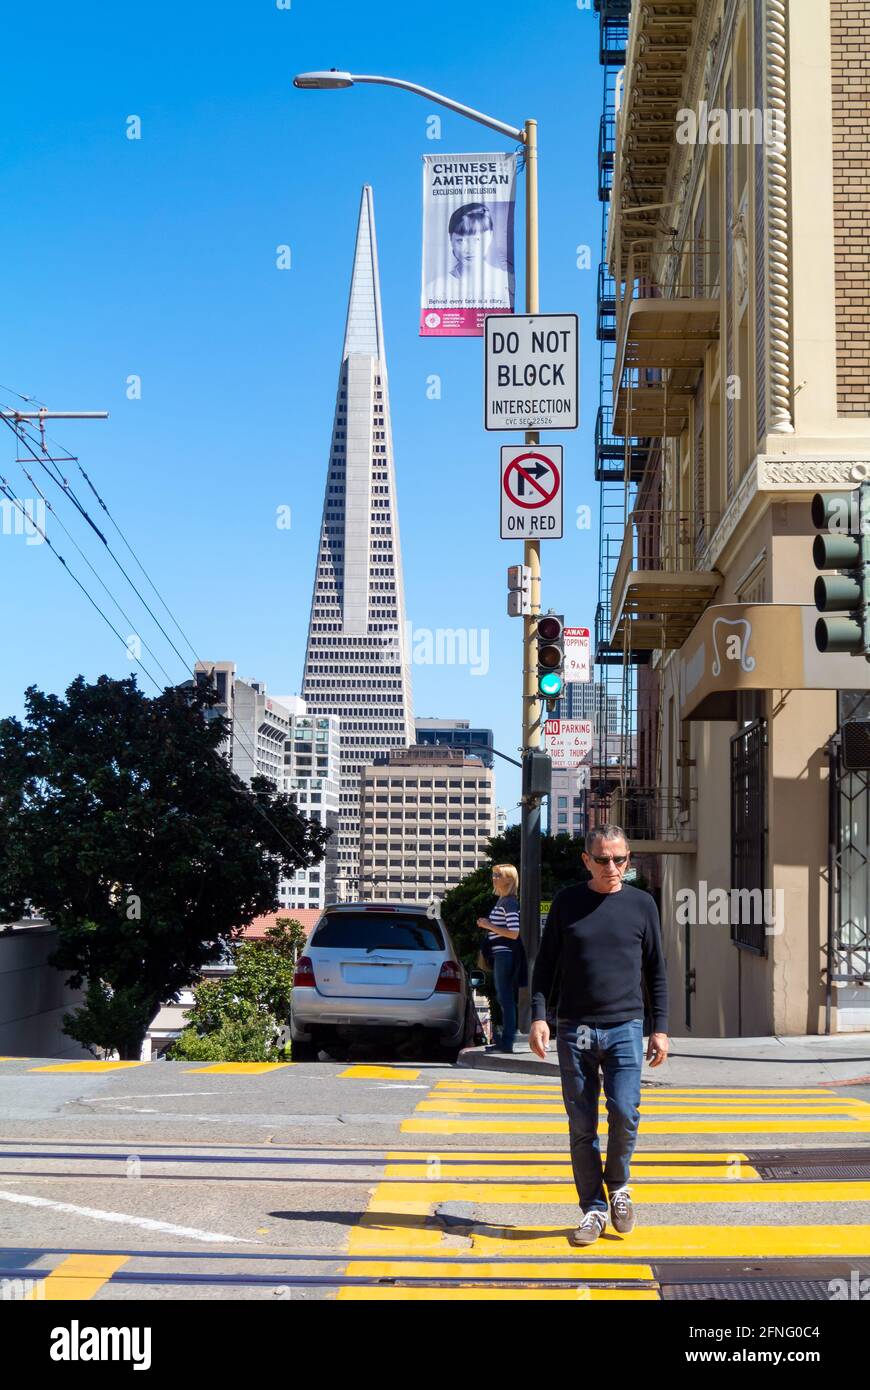 A man walking in the street with Trans America Building in the background, San Francisco, CA, united states of america, usa Stock Photo